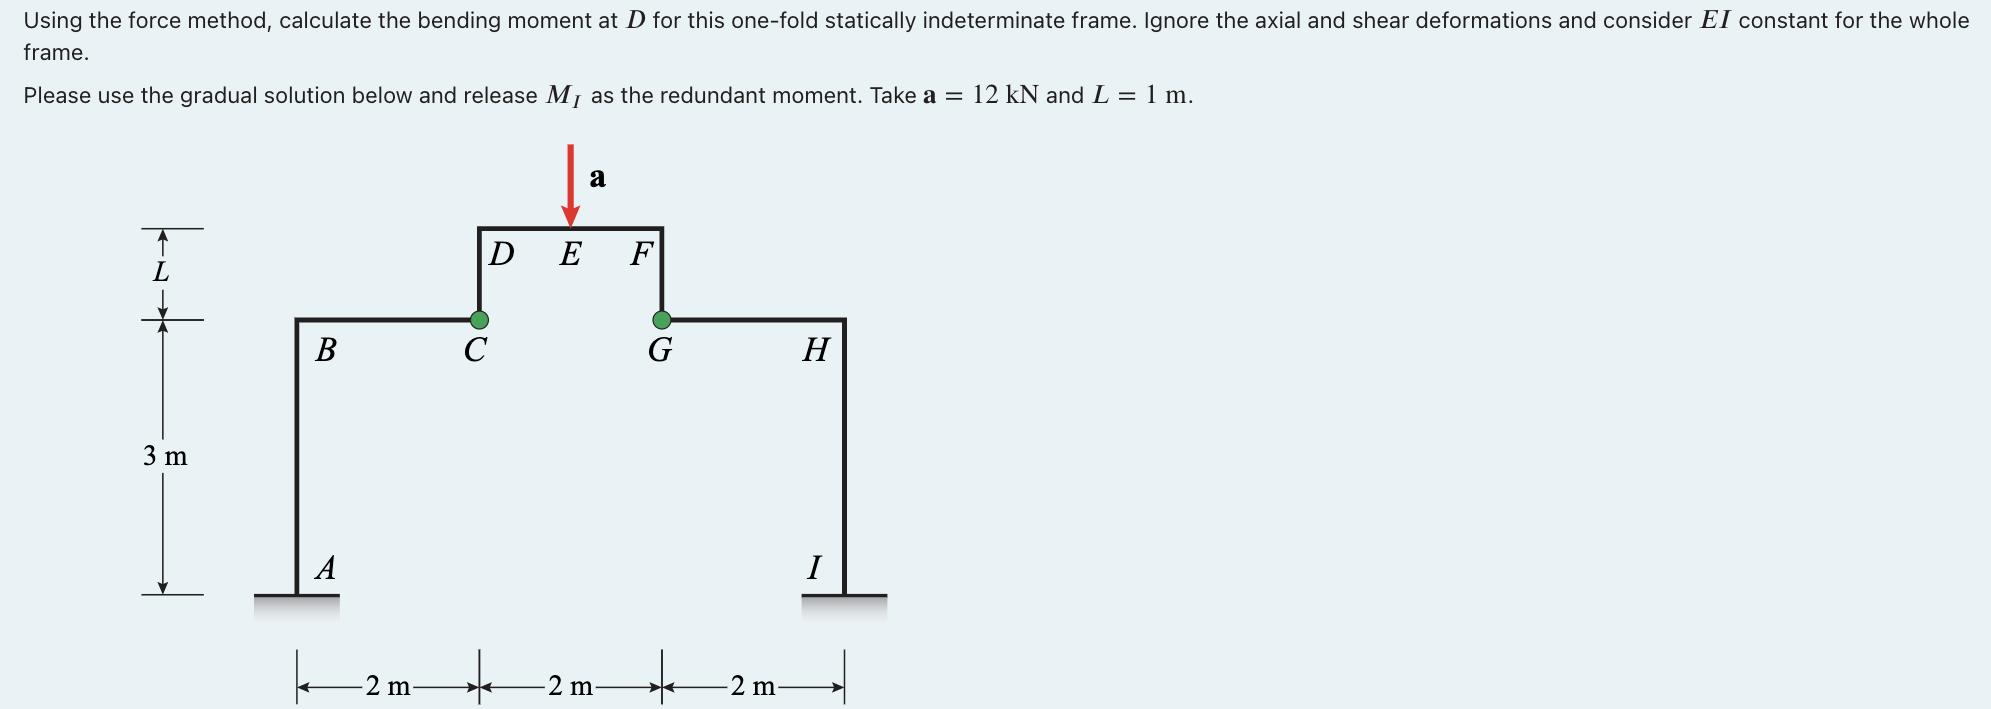 Using the force method, calculate the bending moment at D for this one-fold statically indeterminate frame.